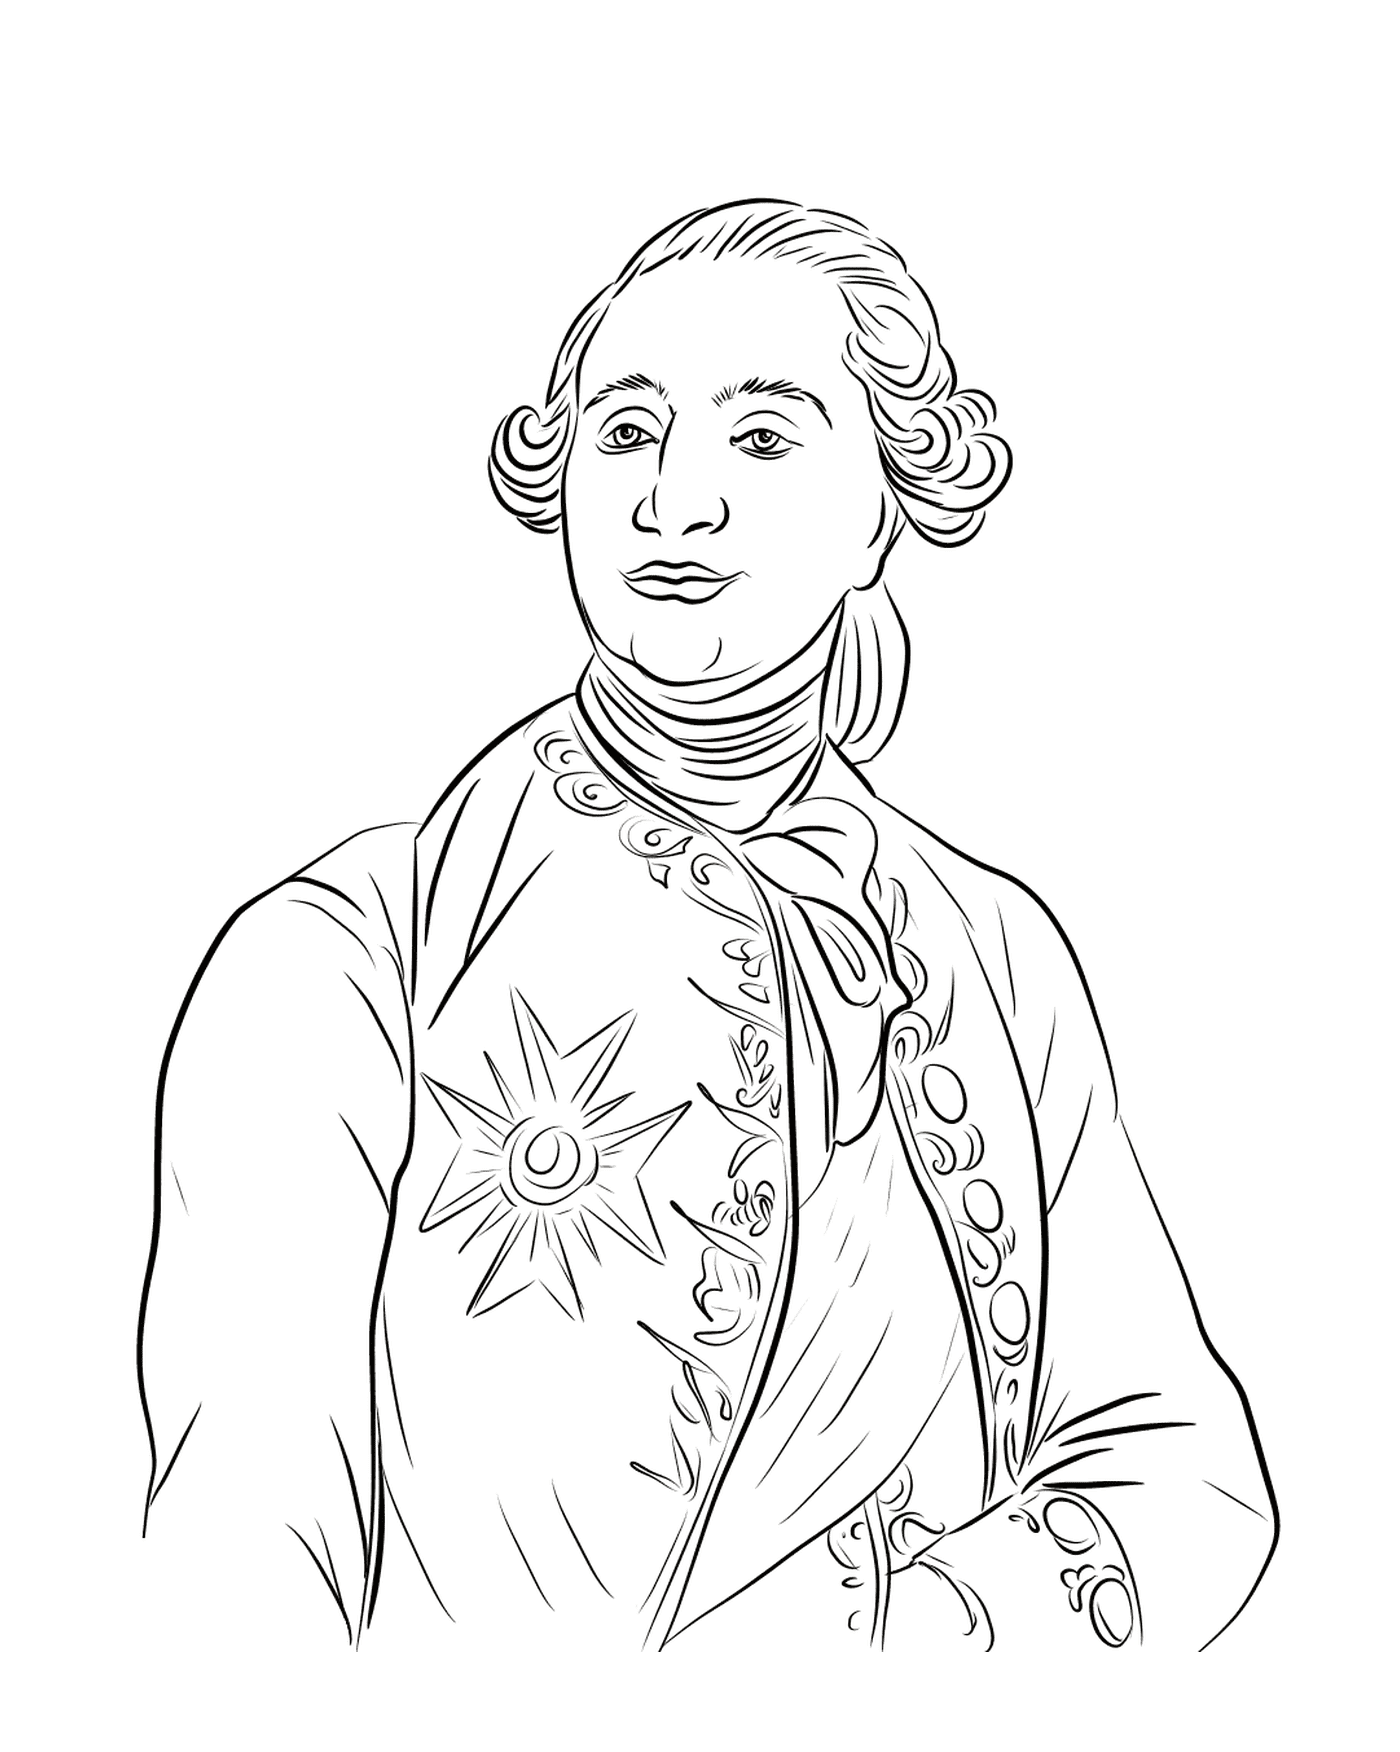  King of France Louis XVI in history 